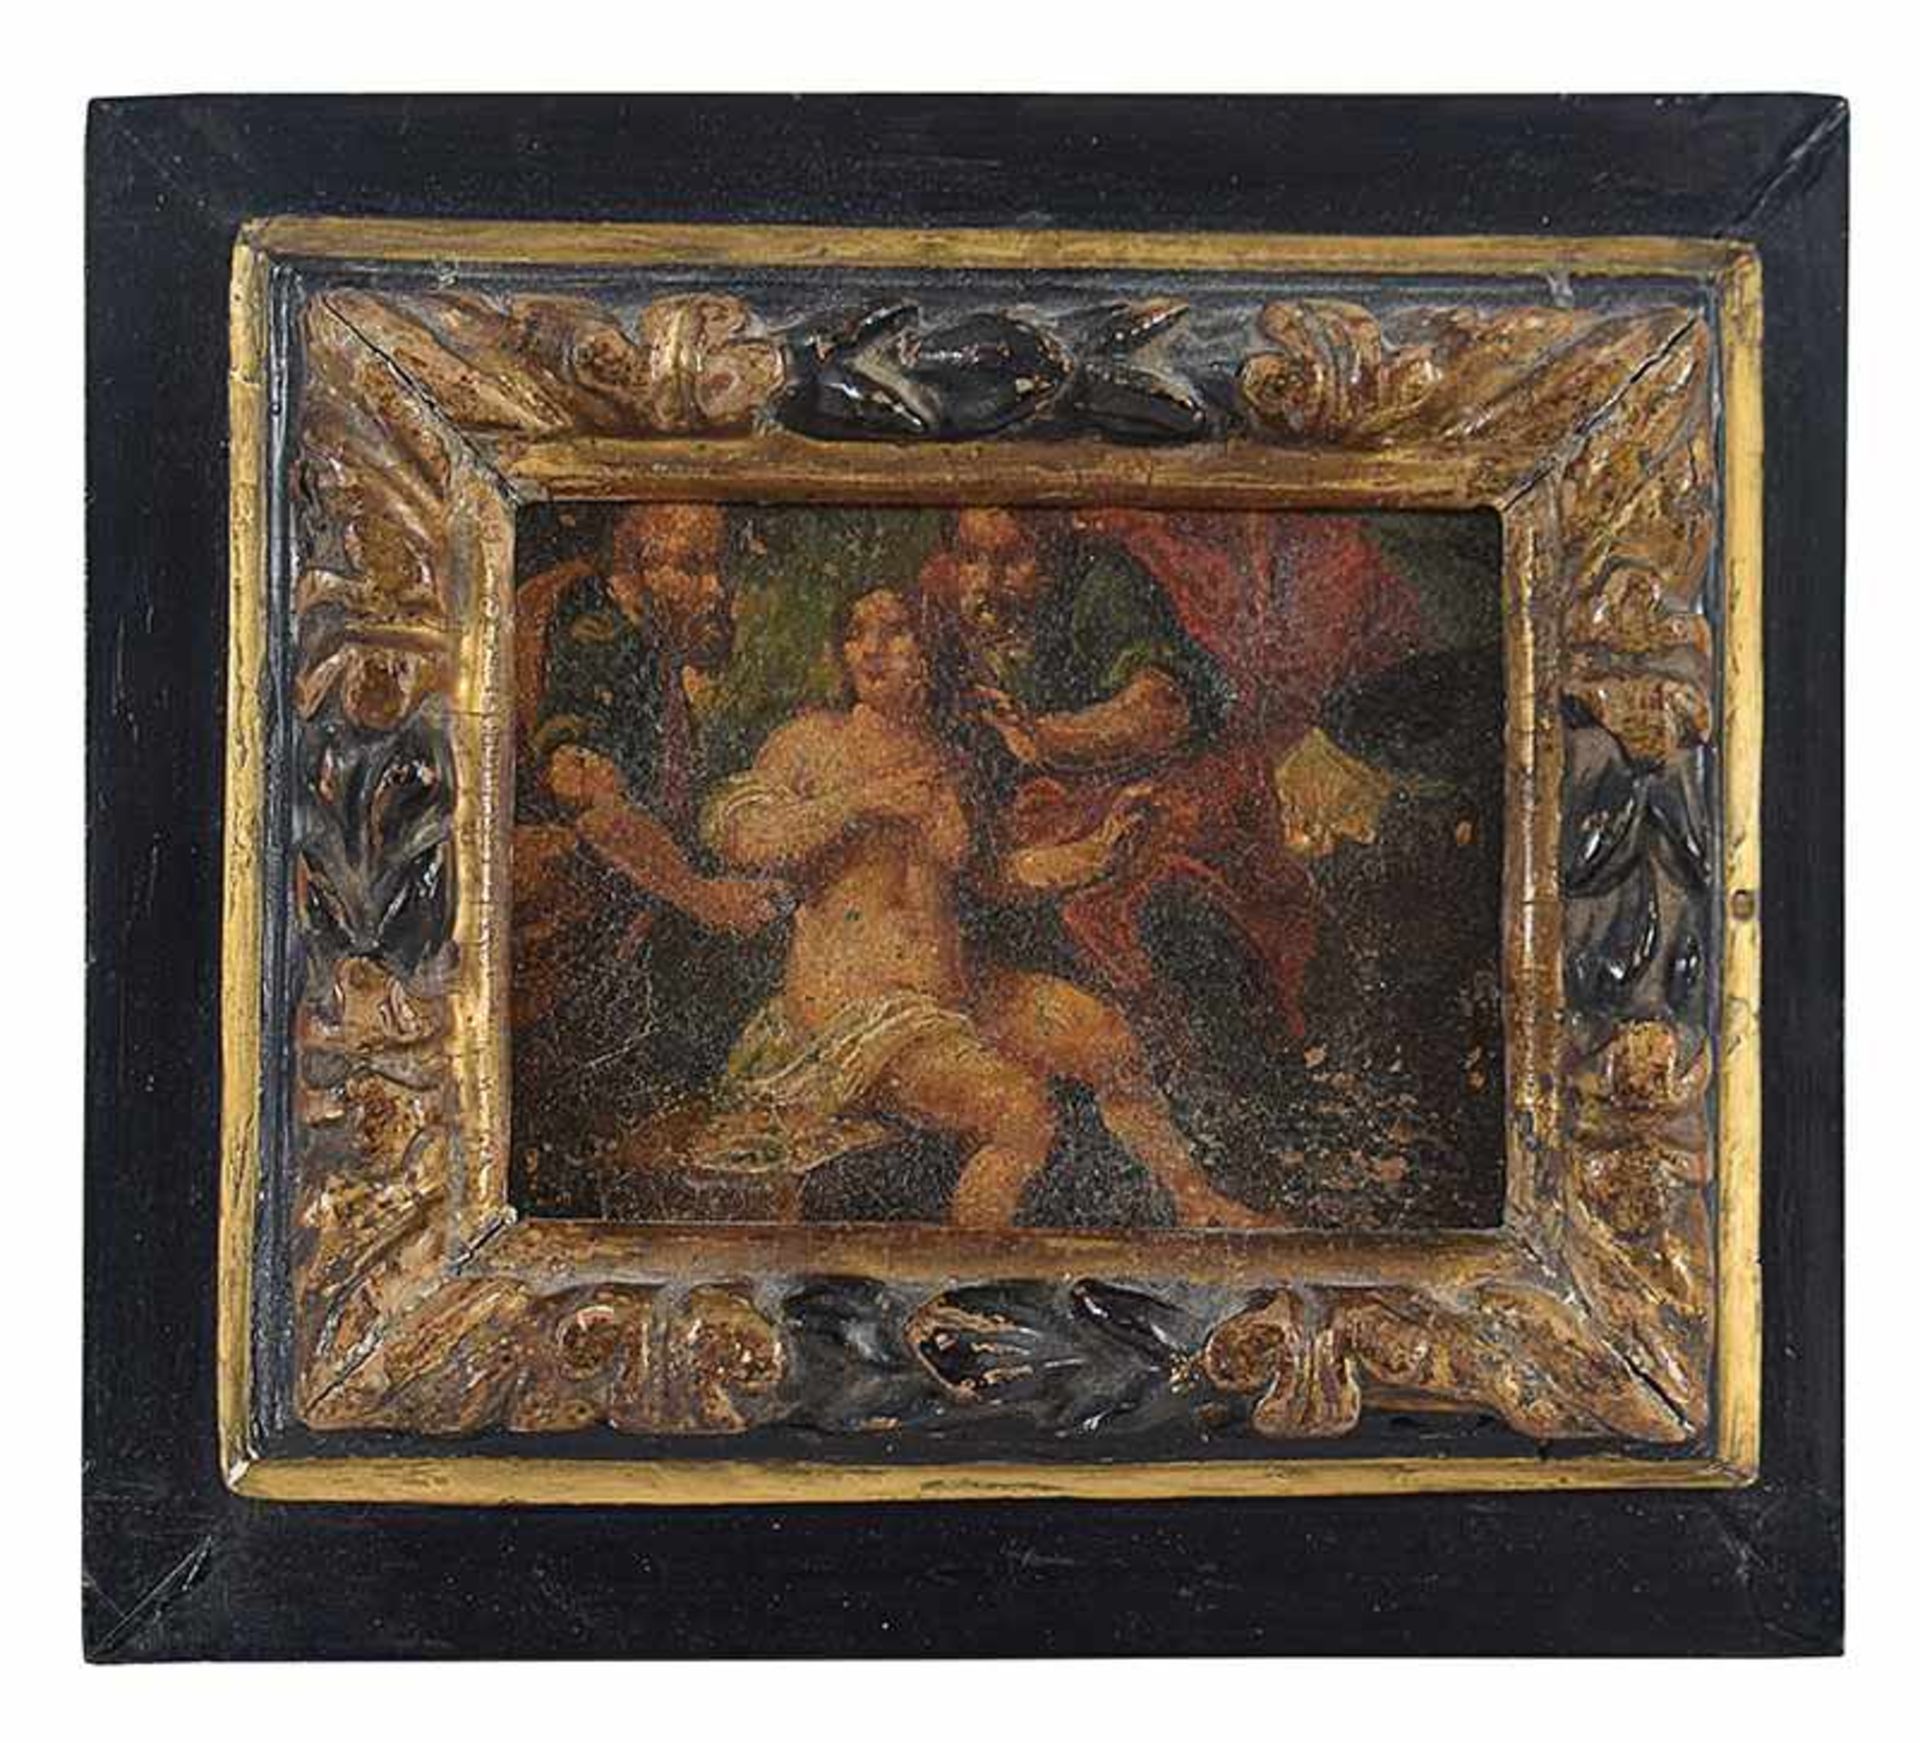 Painter, 17th century Susanna and the Elders br> olio on copper, 11by14,5cm. (some lacks)